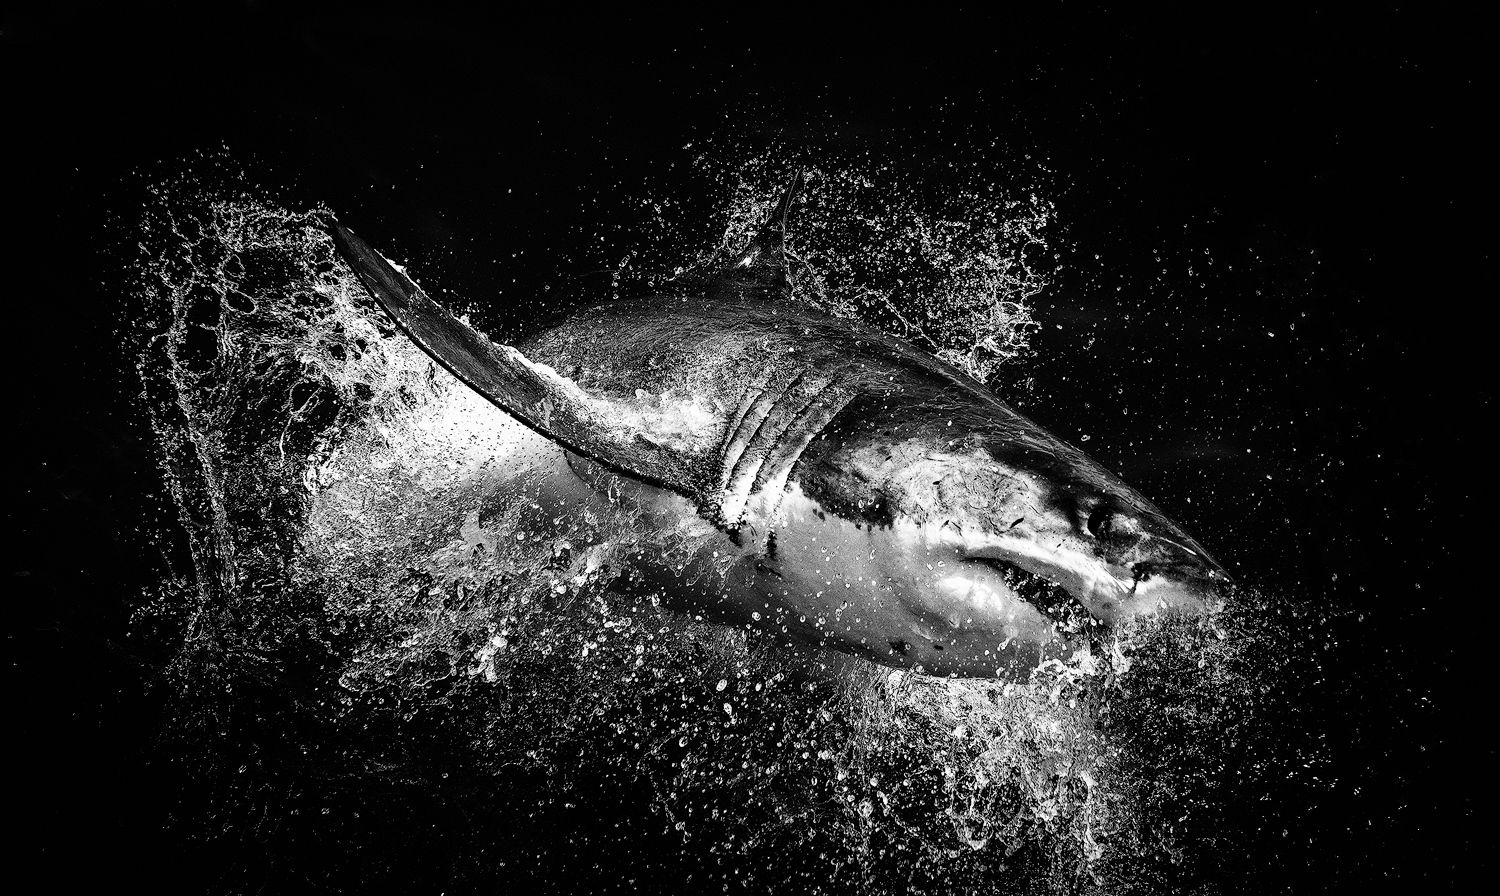 black and white image of a great white shark breaching